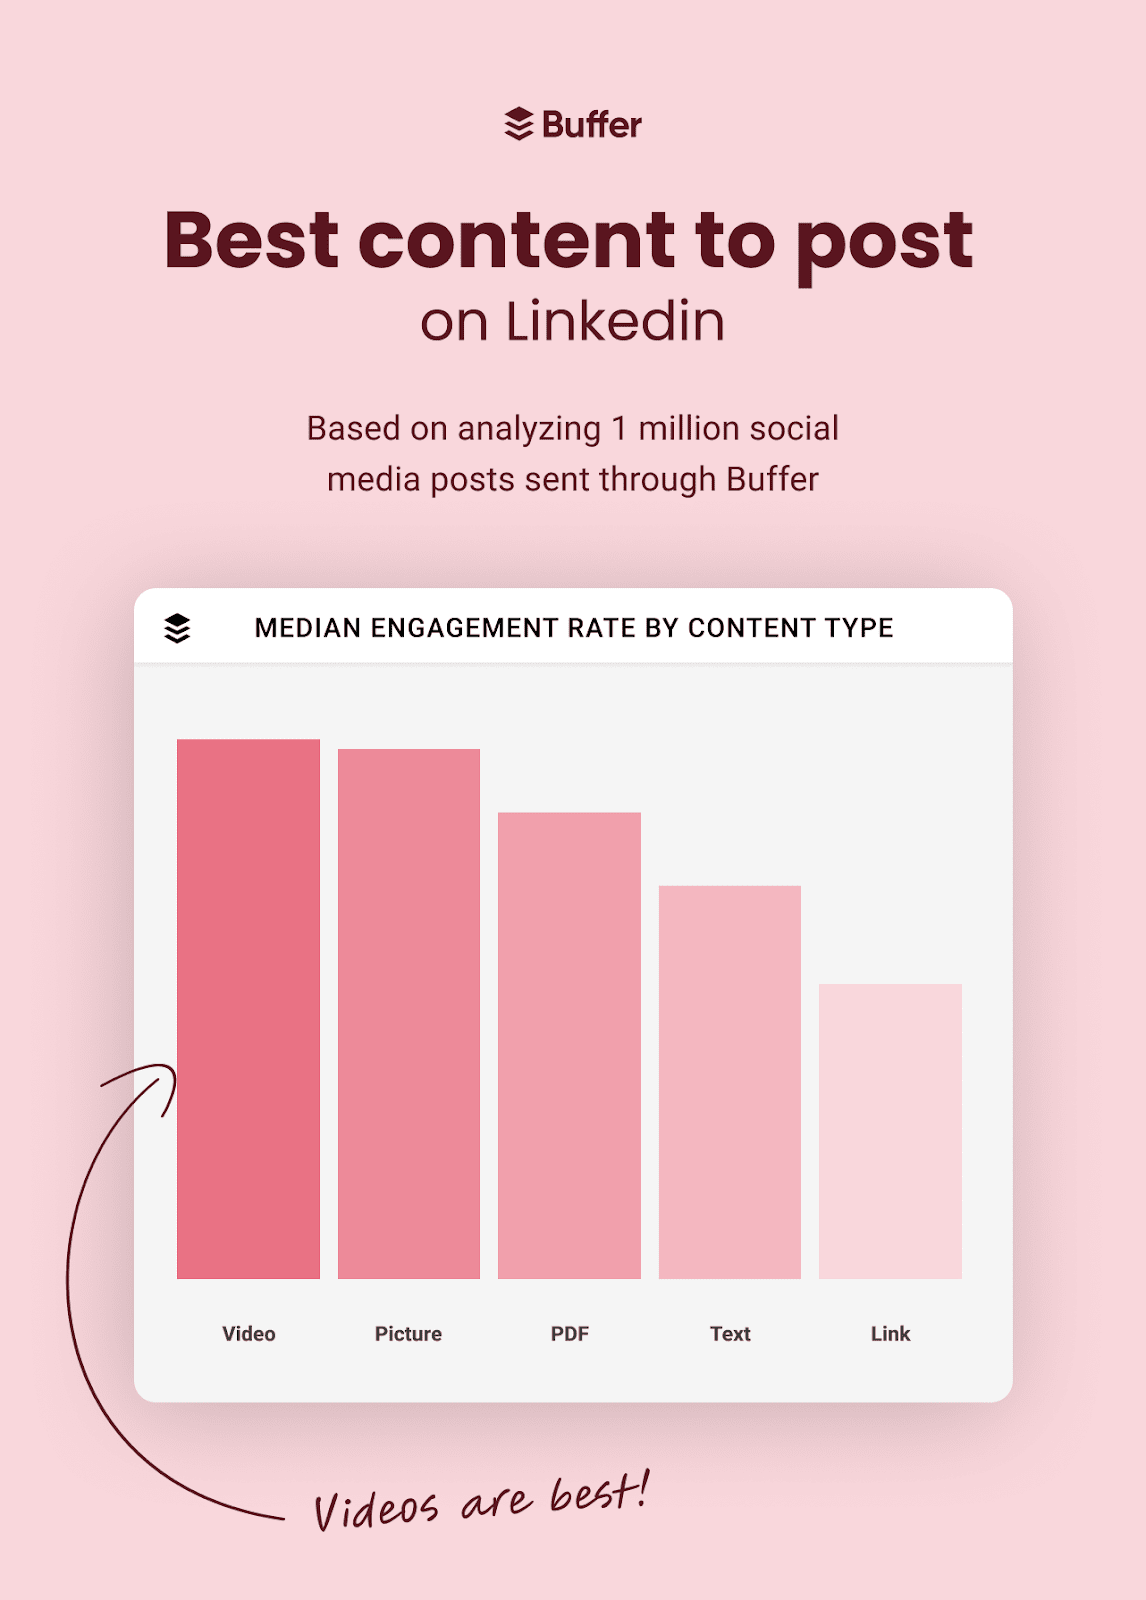 A graph showing the best content type to post on LinkedIn for engagement